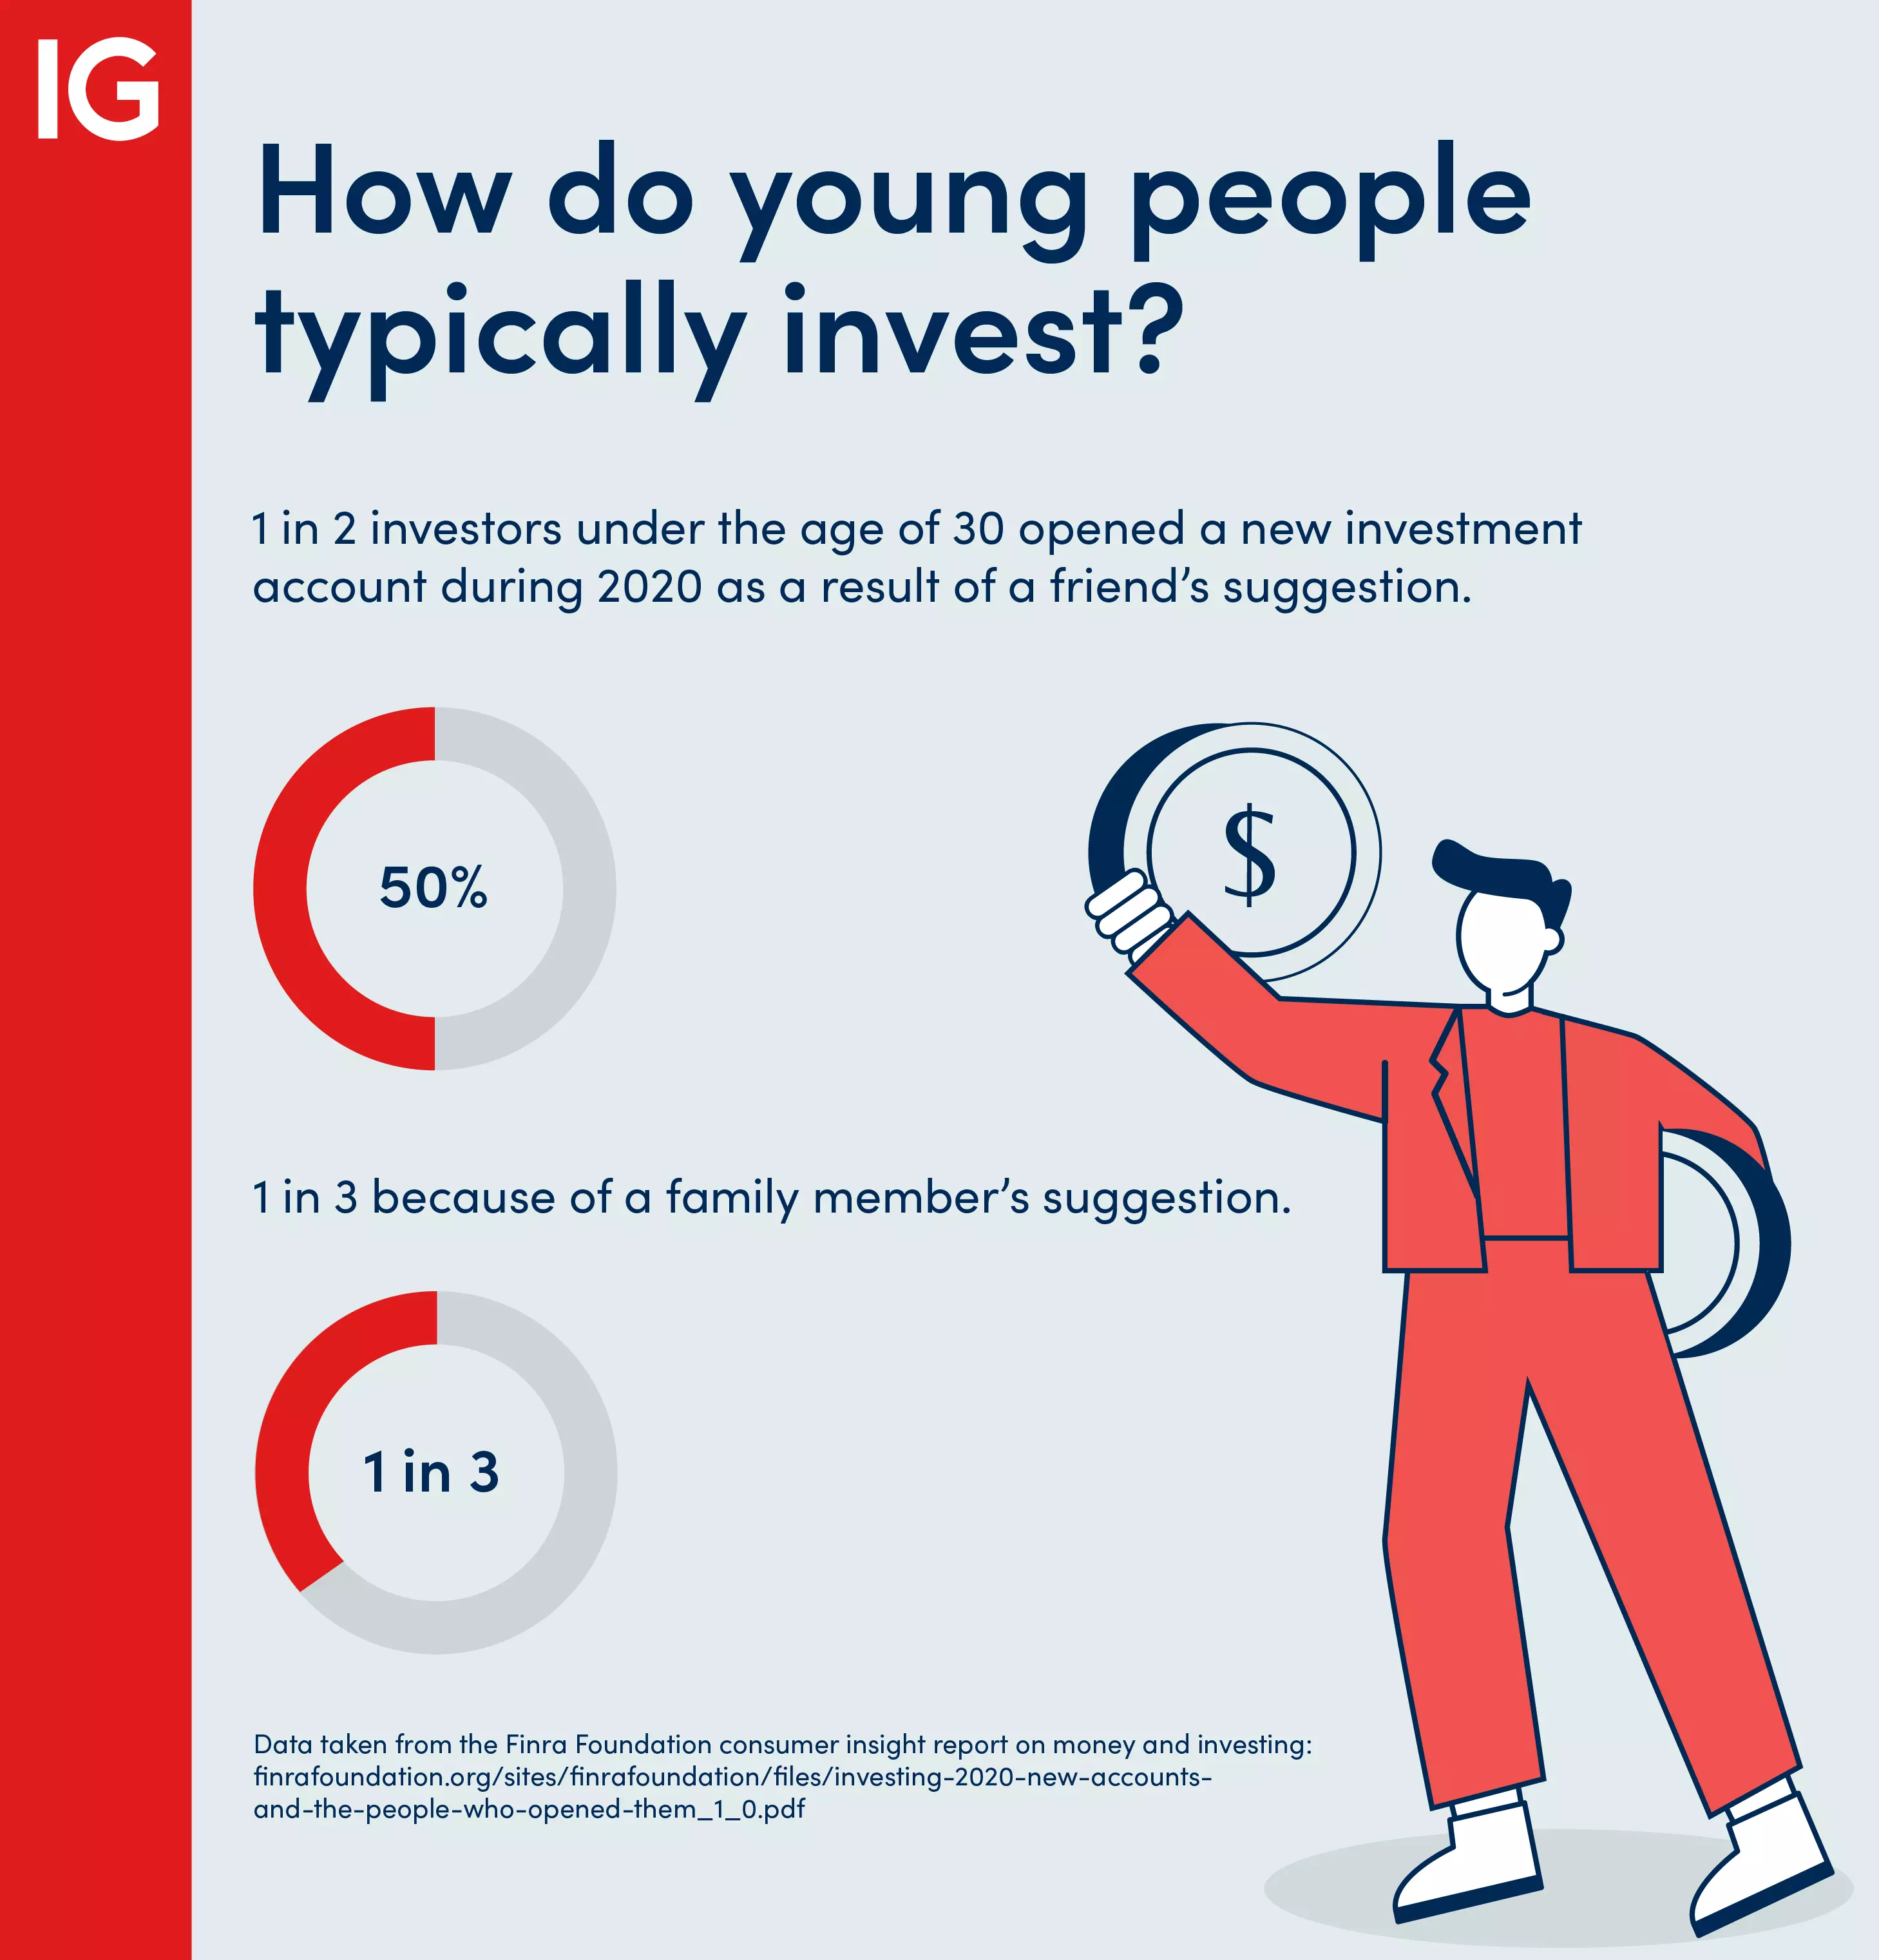 How do young people typically invest?